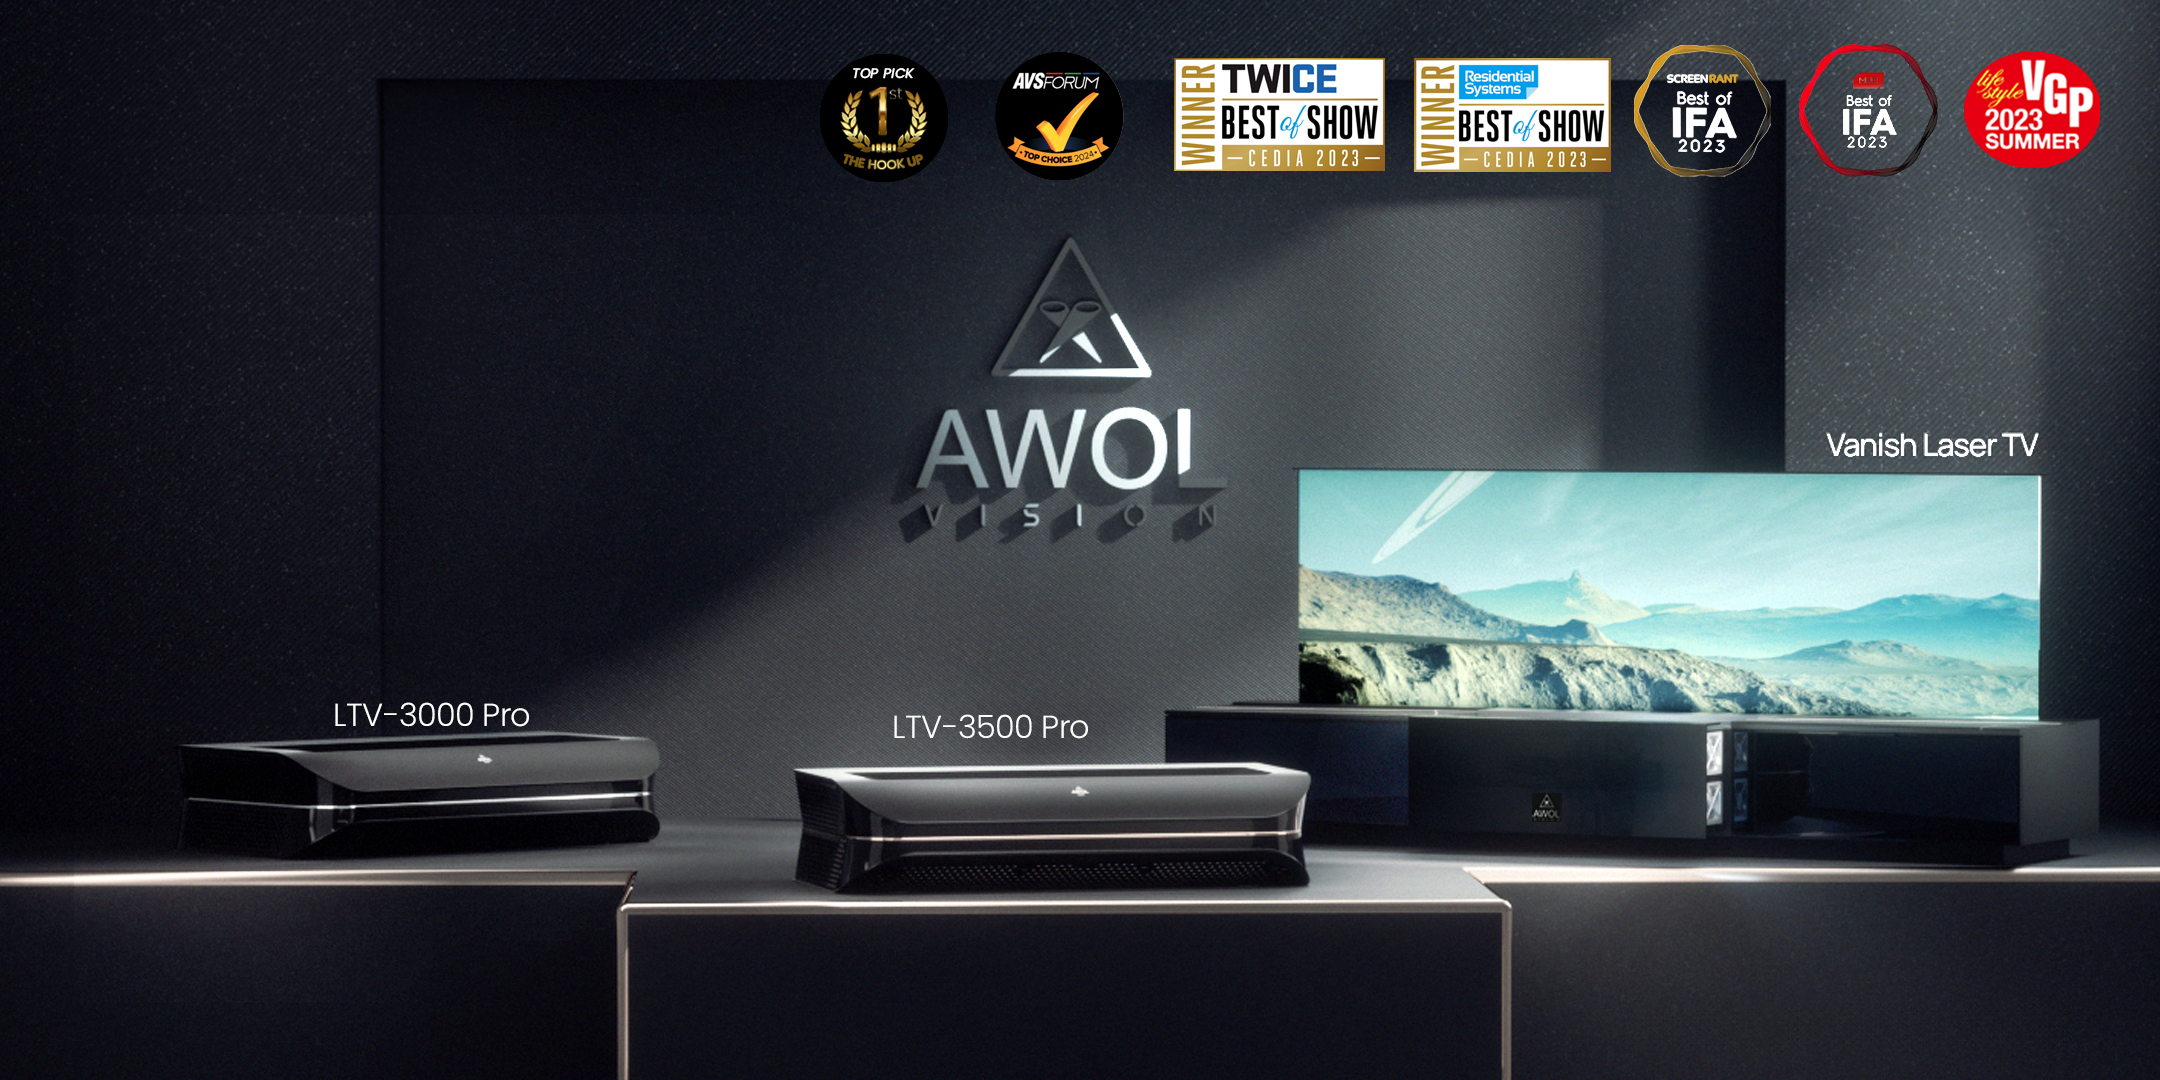 AWOL Vision LTV-3000 Pro, LTV-3500 Pro laser projectors, and Vanish Laser TV are displayed, showcasing multiple industry awards.